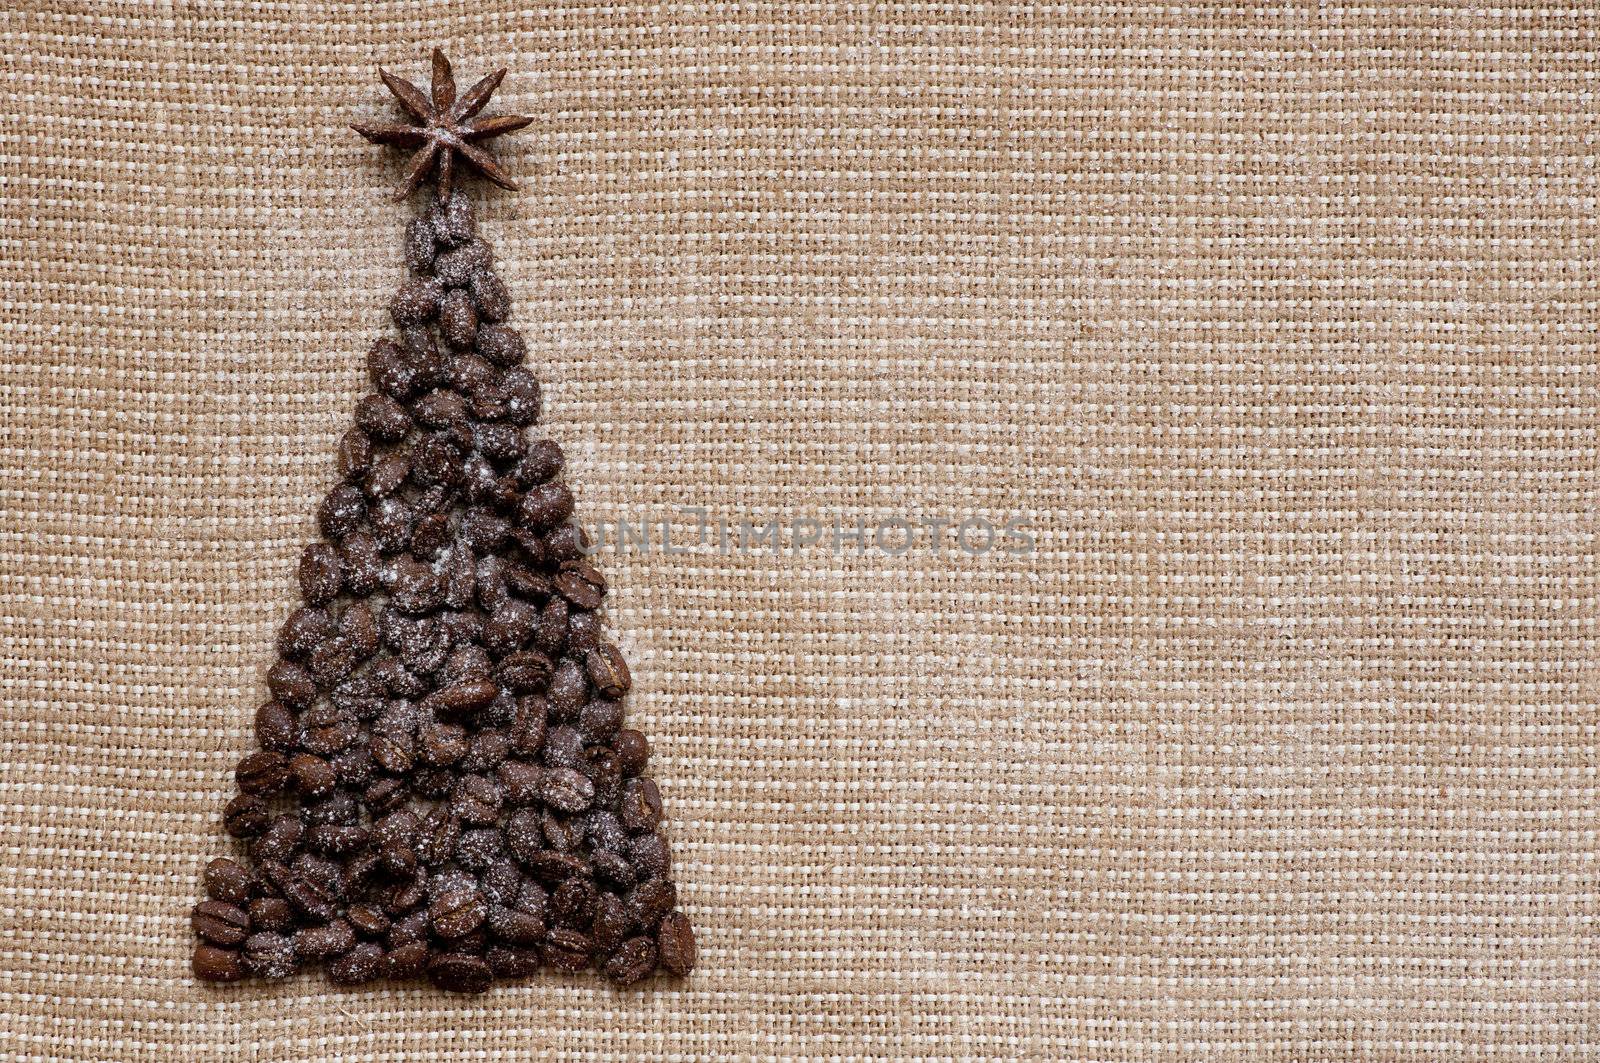 christmass tree made of coffee beans on sack background postcard